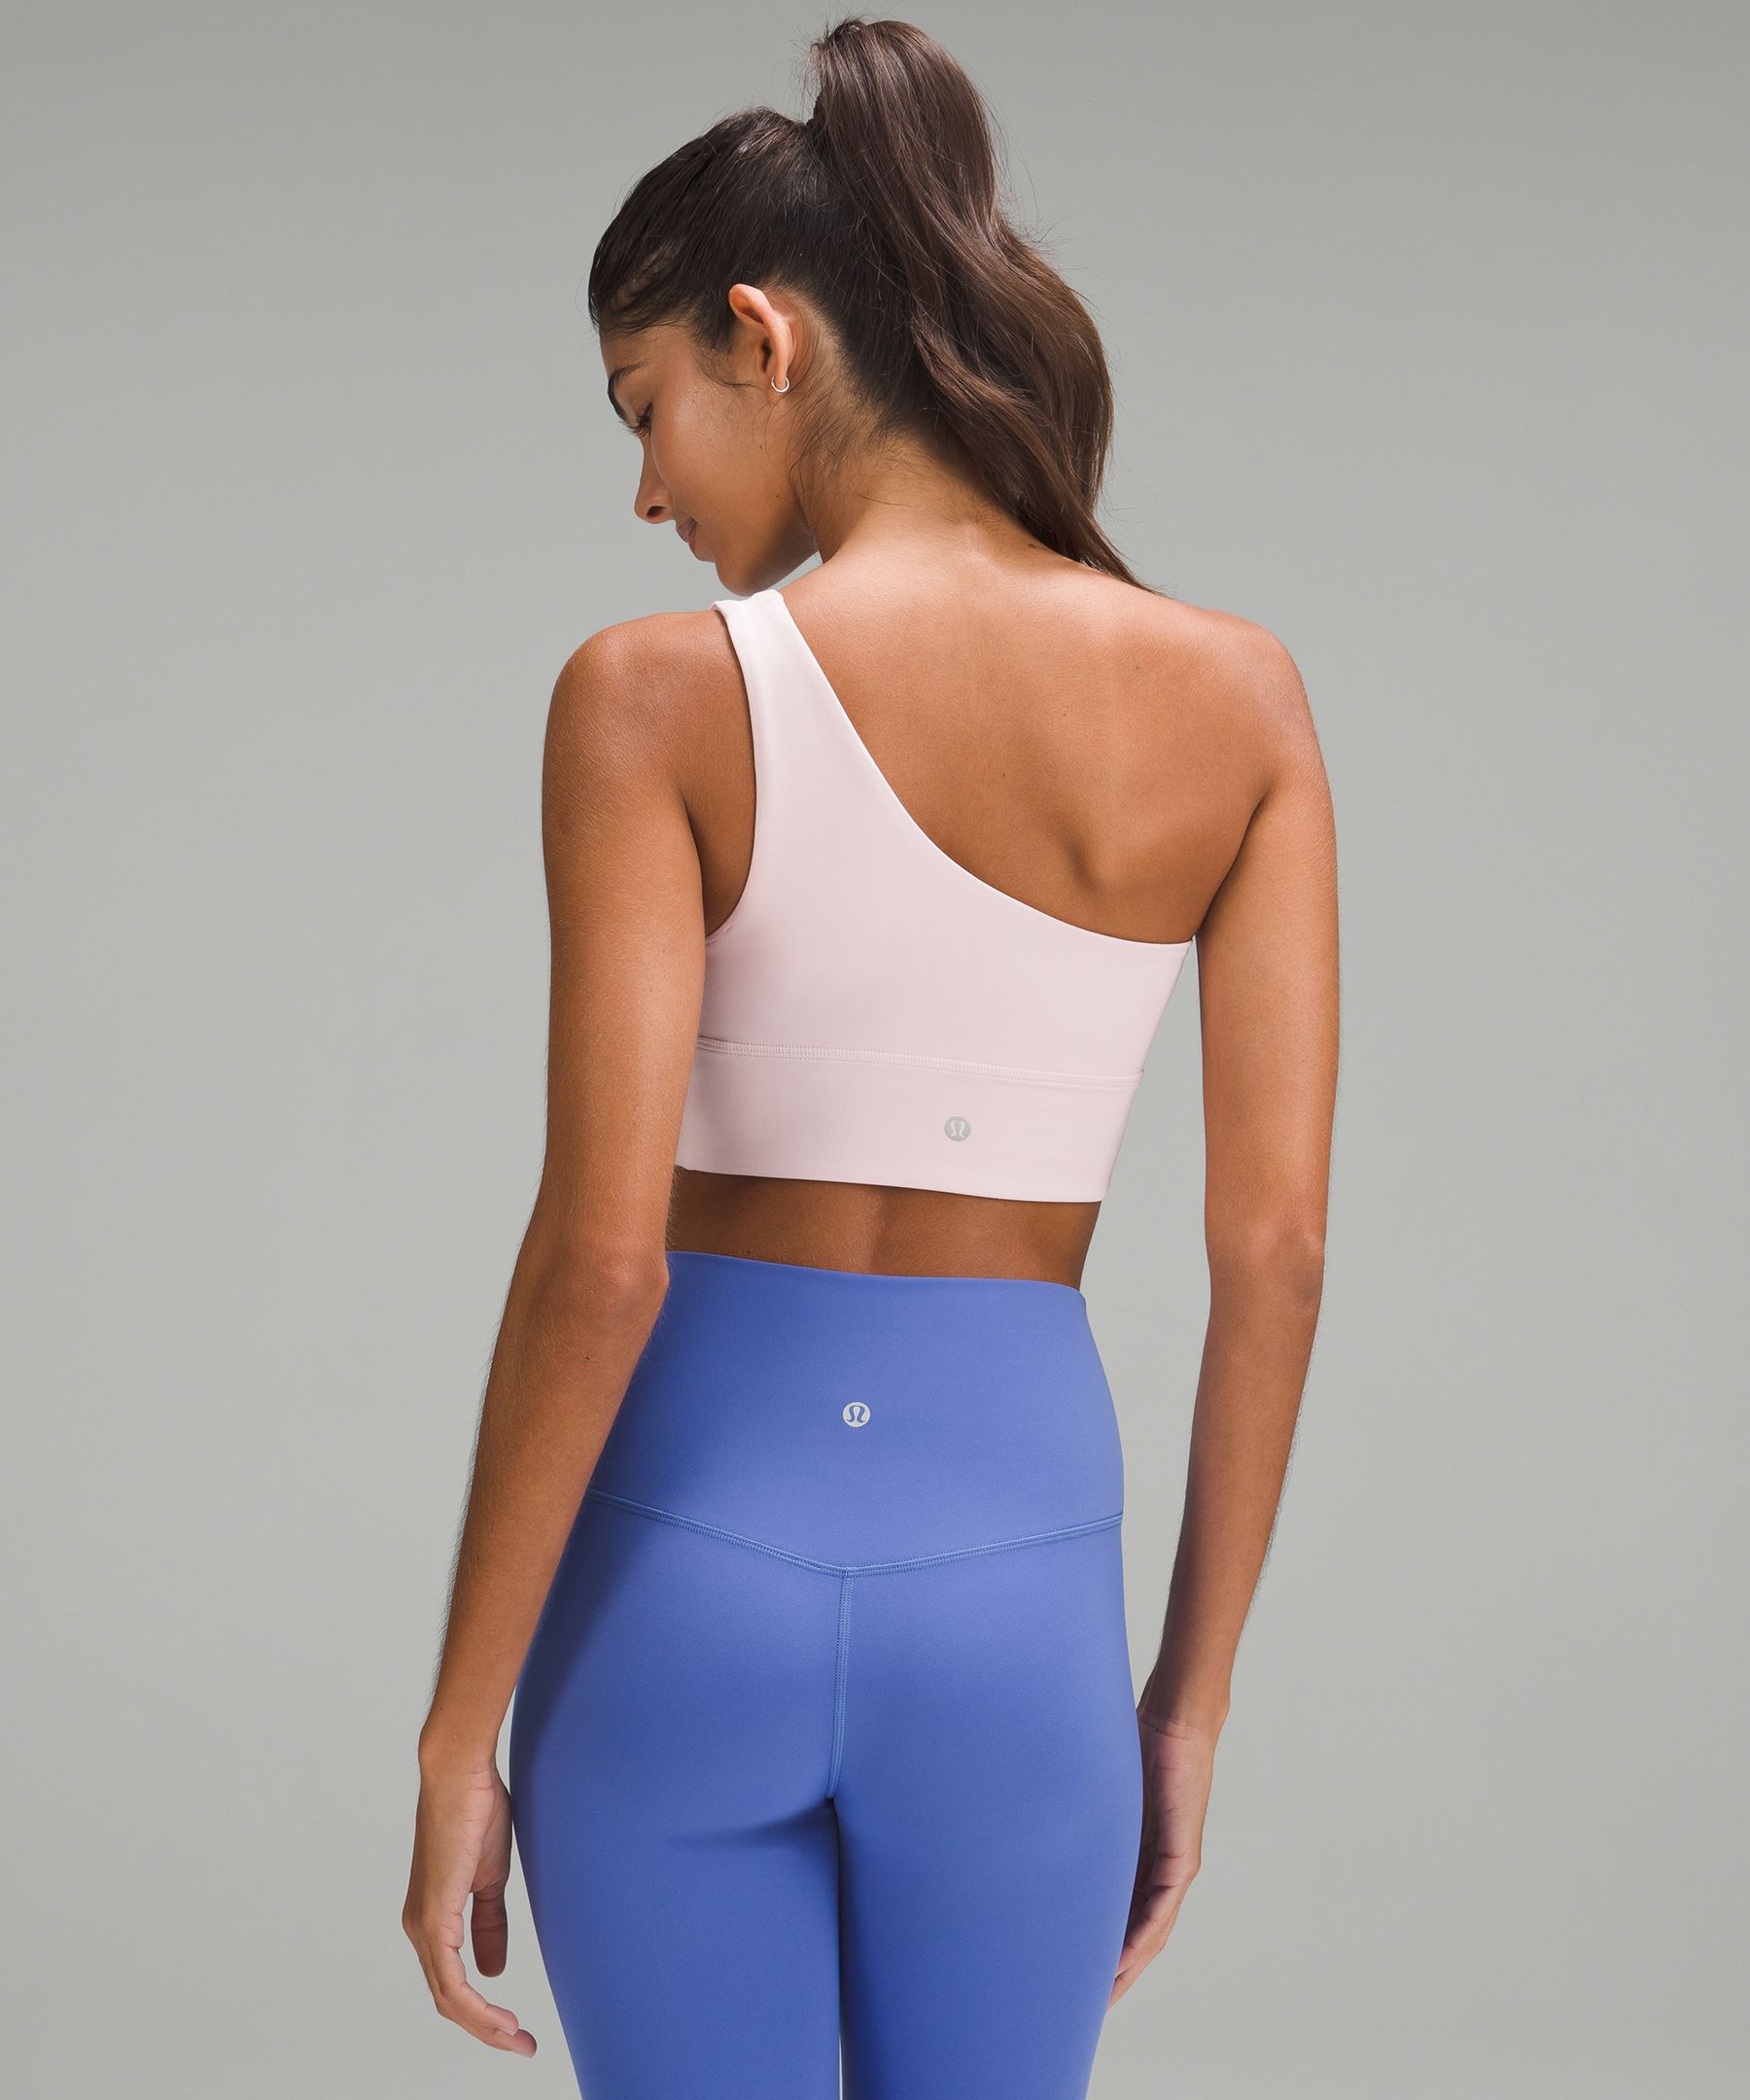 Lululemon Blue Align Sports Bra Size 4 - $45 New With Tags - From